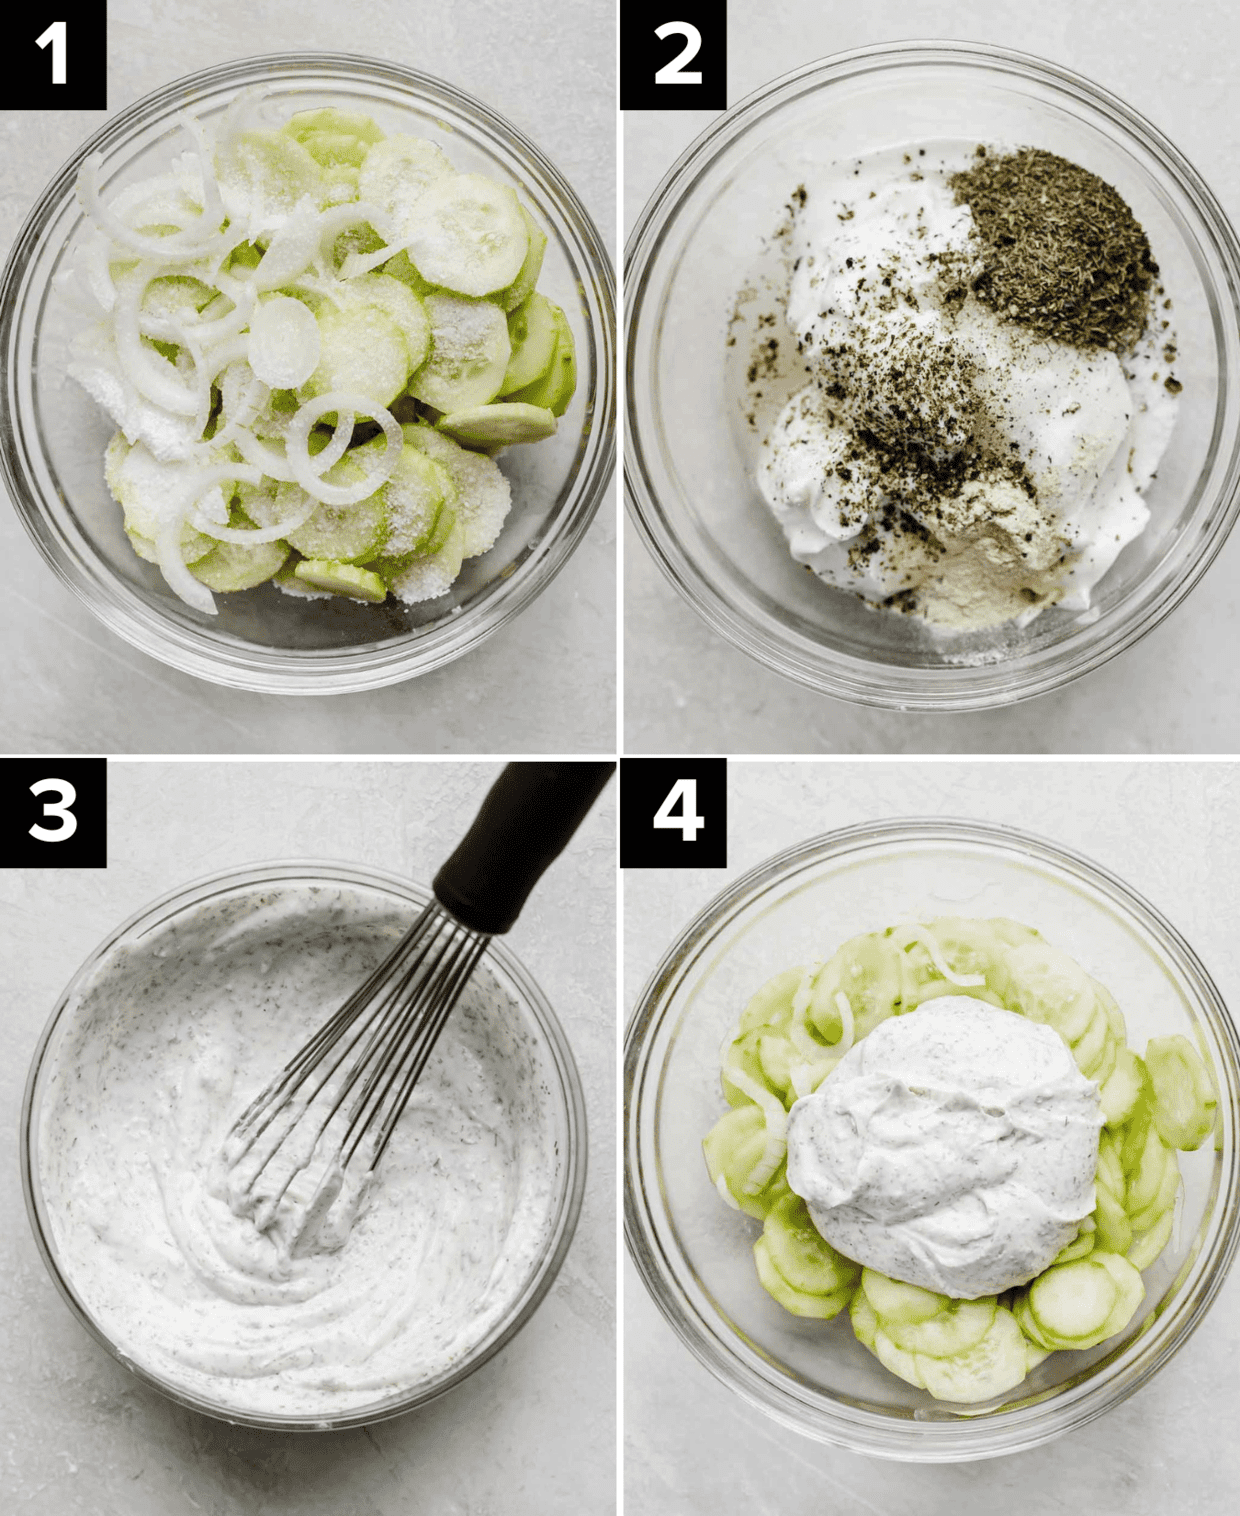 Four images showing the making of Creamy Cucumber Salad, a glass bowl on a light gray background with sliced cucumbers and a creamy dressing being added.